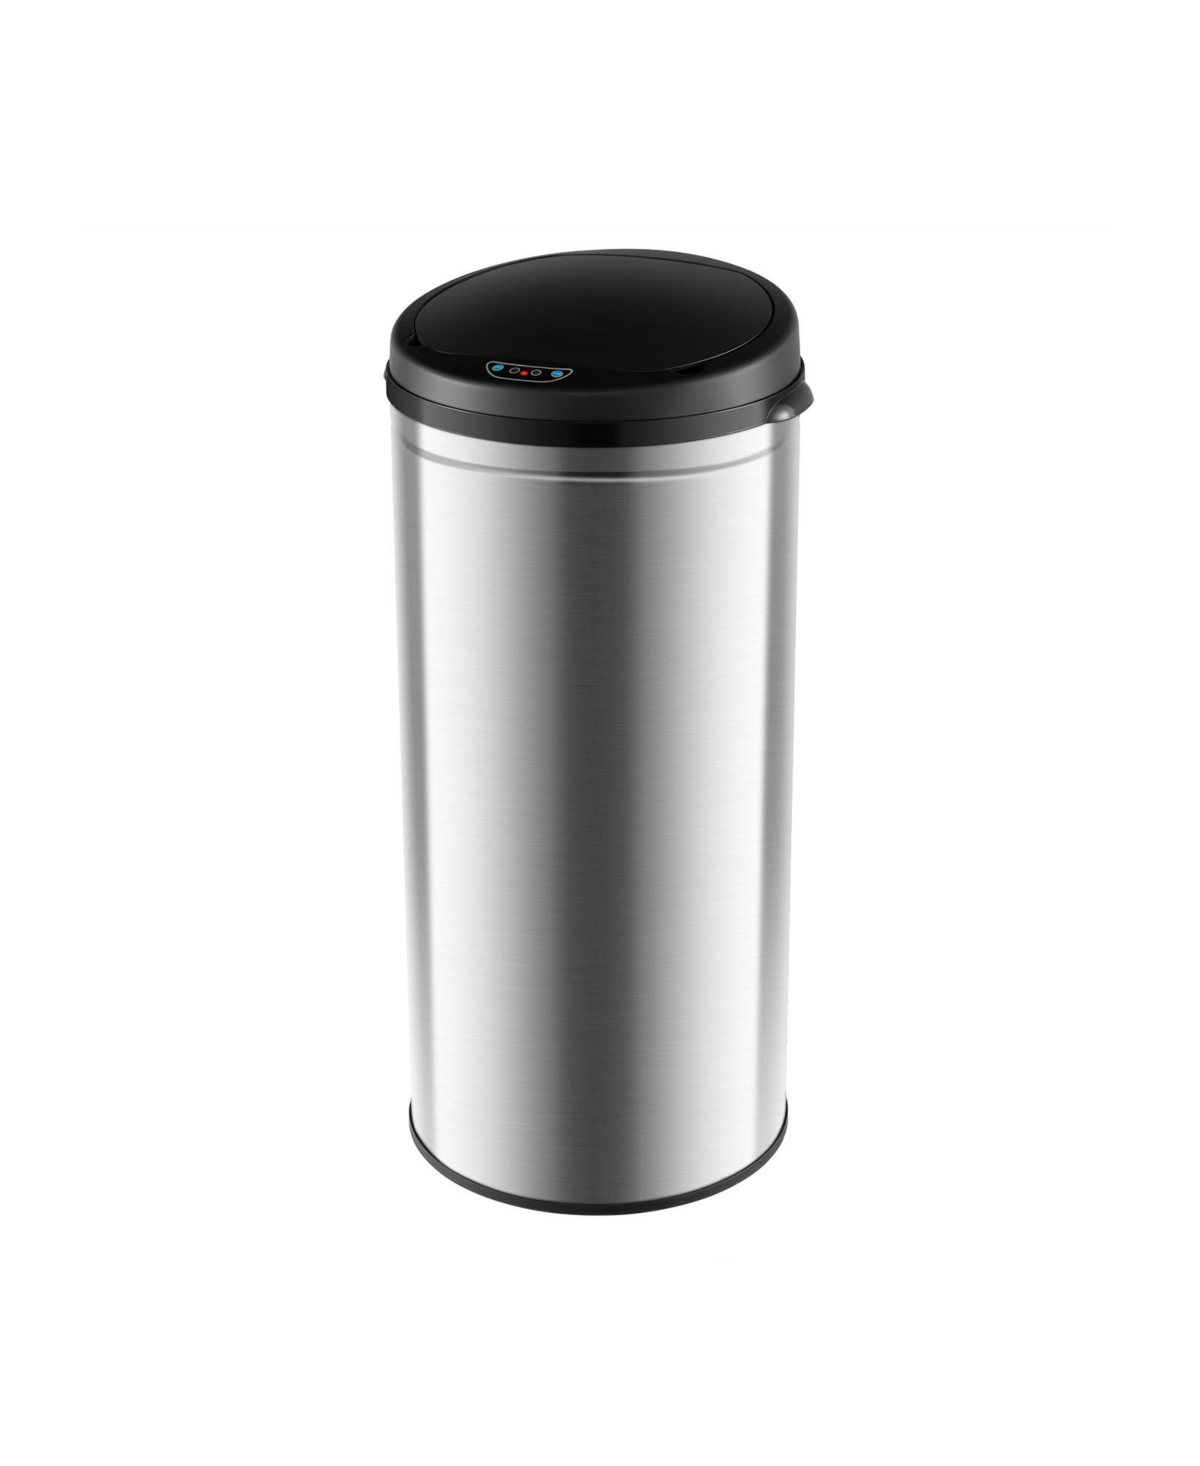 8 Gal Automatic Trash Can with Stainless Steel Frame Touchless Waste Bin-Silver - Silver